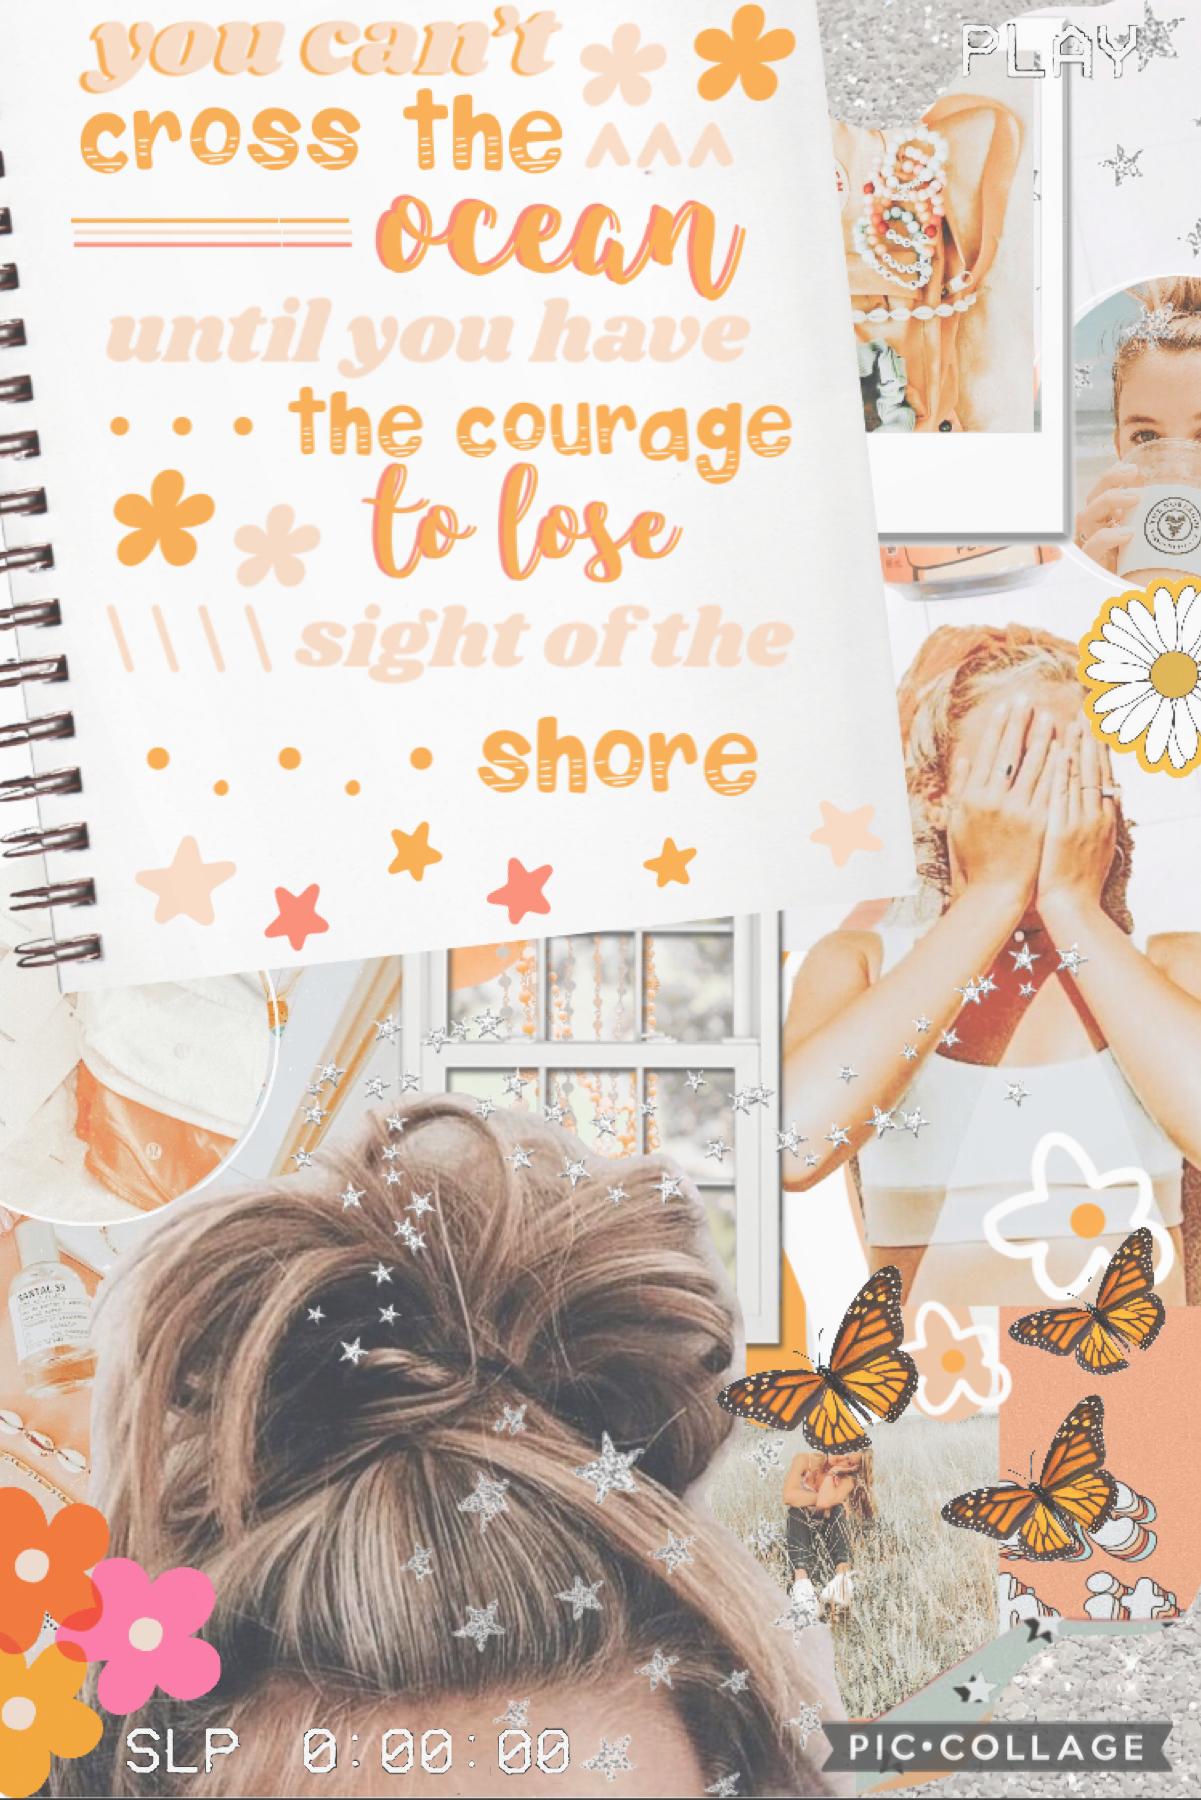 🍑 t a p 🍑
this collage took me so long 😅 but I think it turned out pretty good wbu? ig my account is like a mix of beach, peachy, and color coordinated collages. 